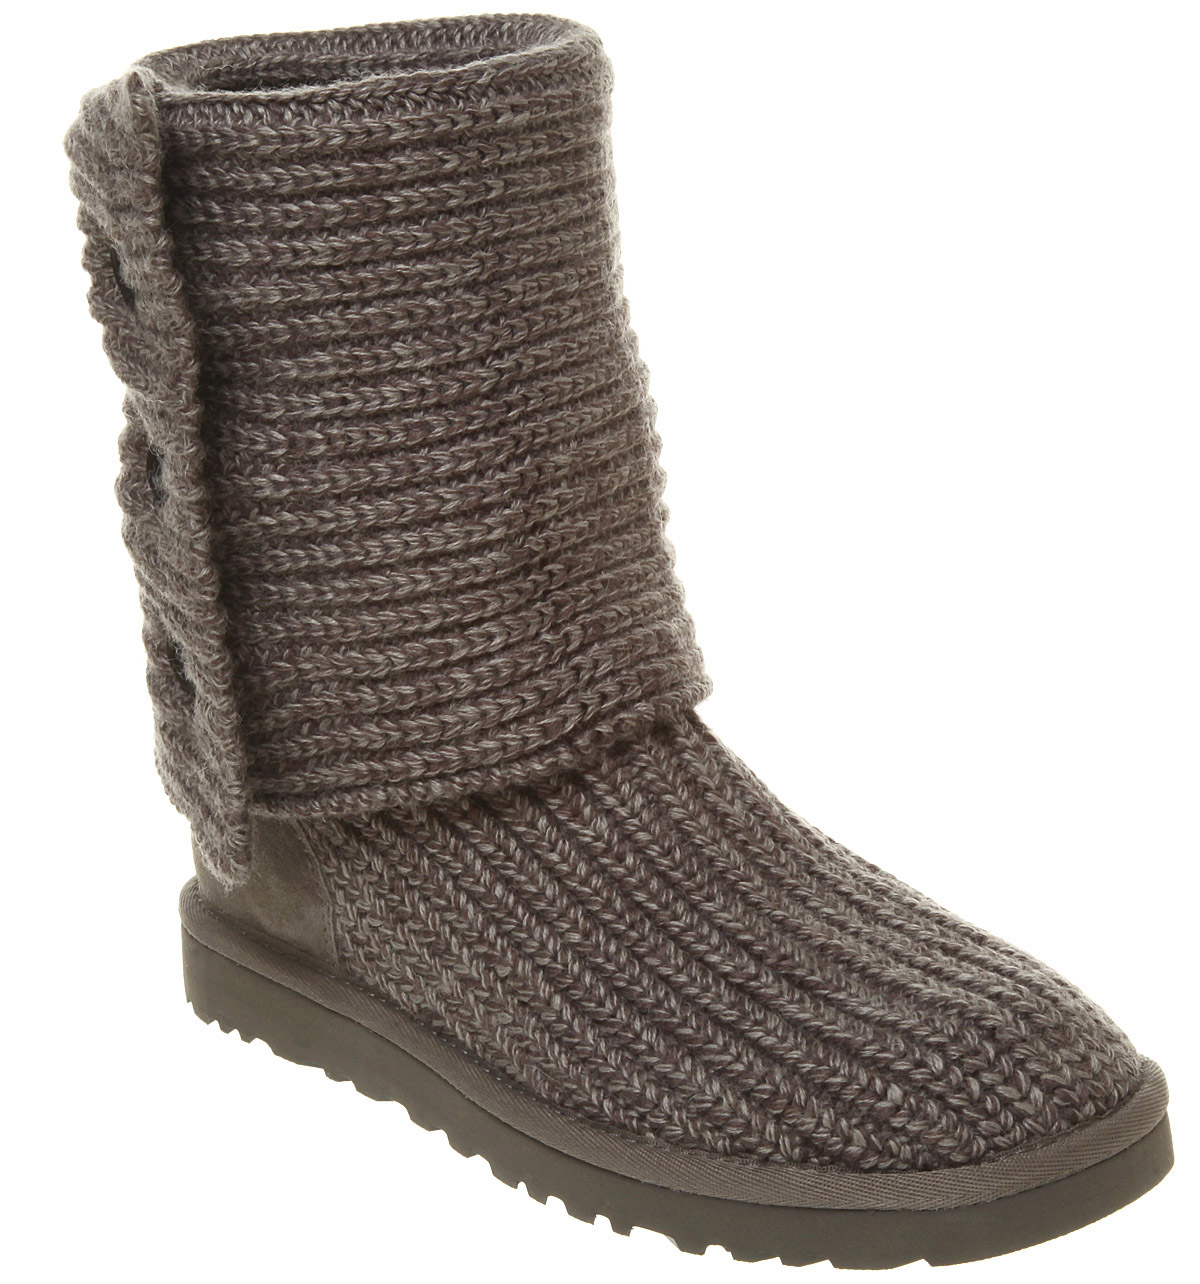 knitted boots 2017.7 ugg boots knitted WJSCVOO